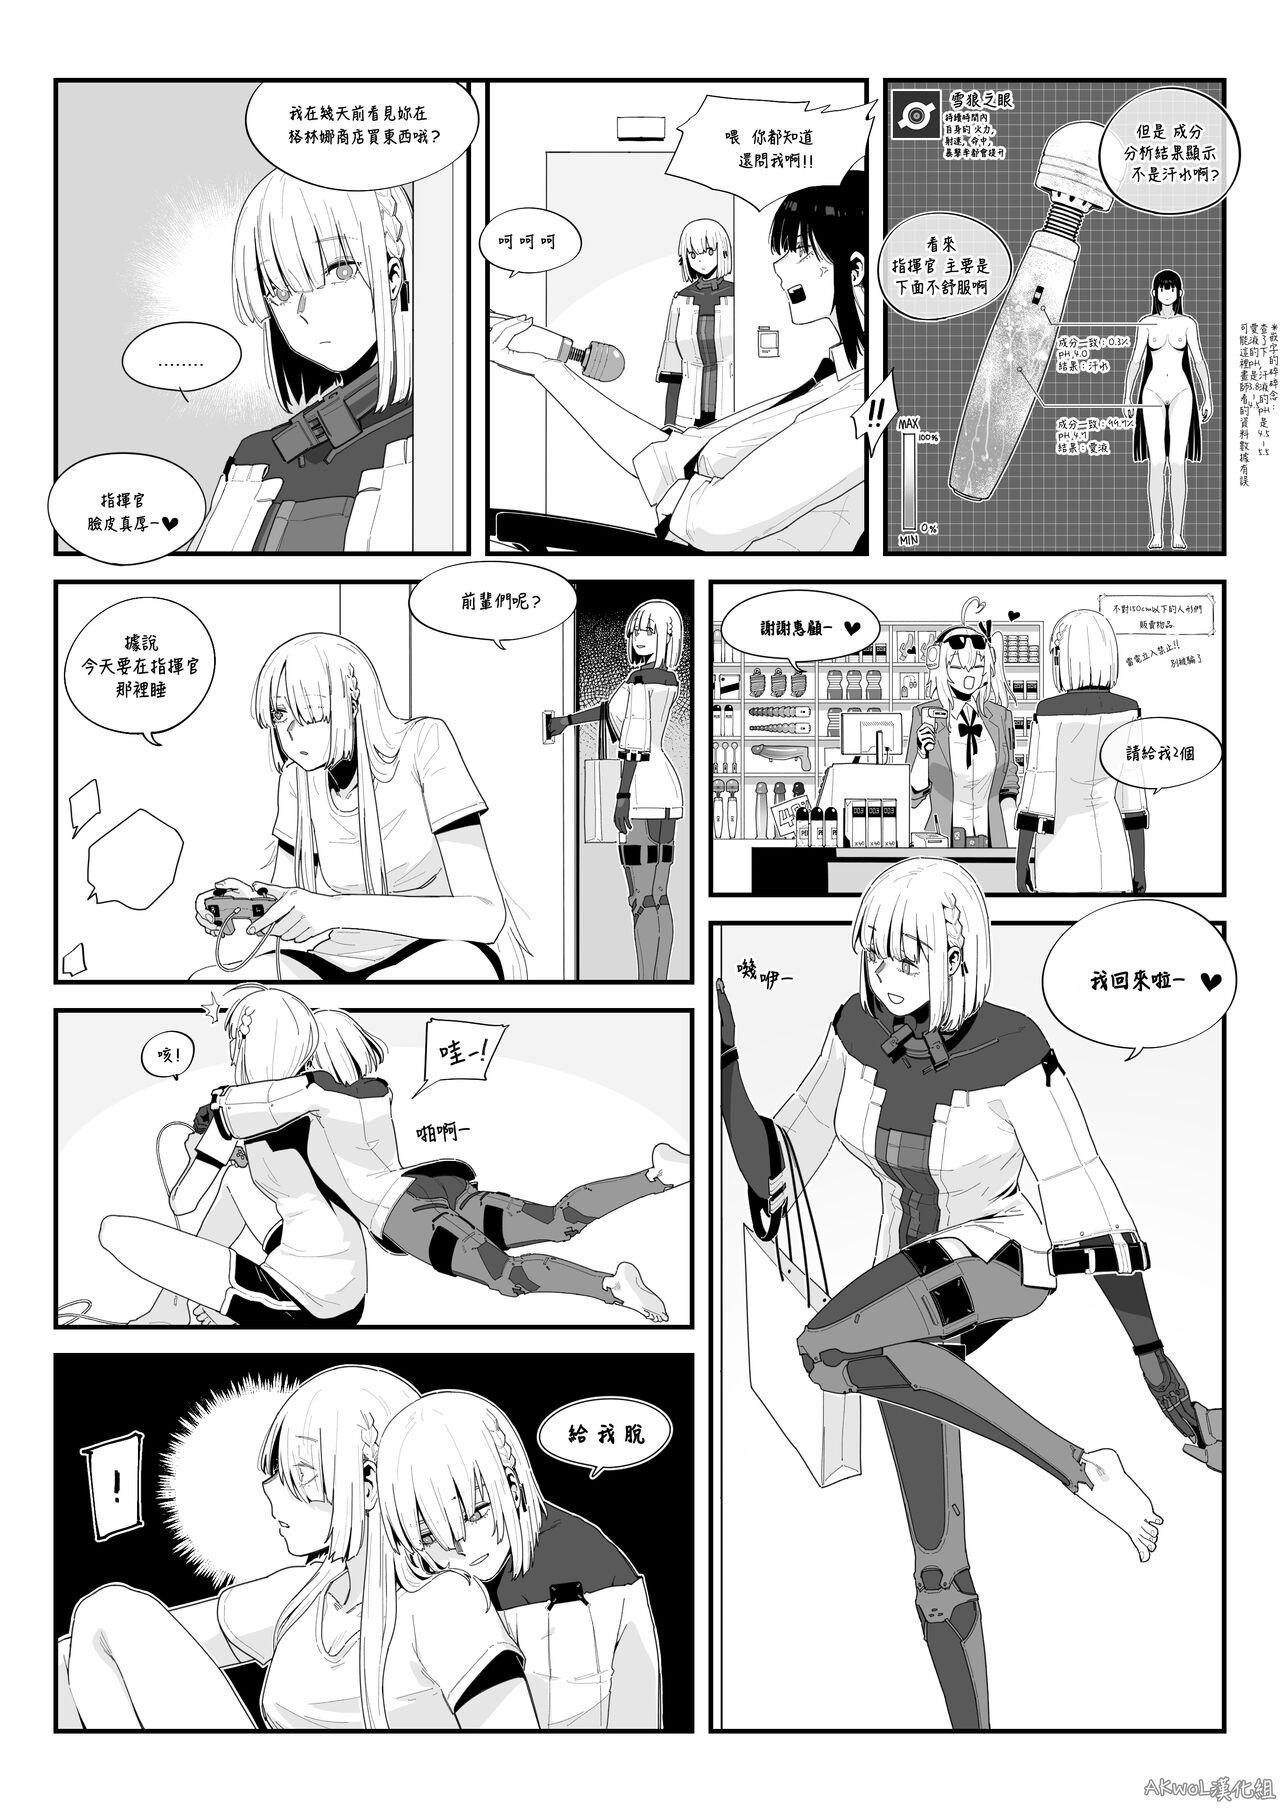 Bigbooty Crazy Dog Master 2 - Girls frontline Thick - Page 2